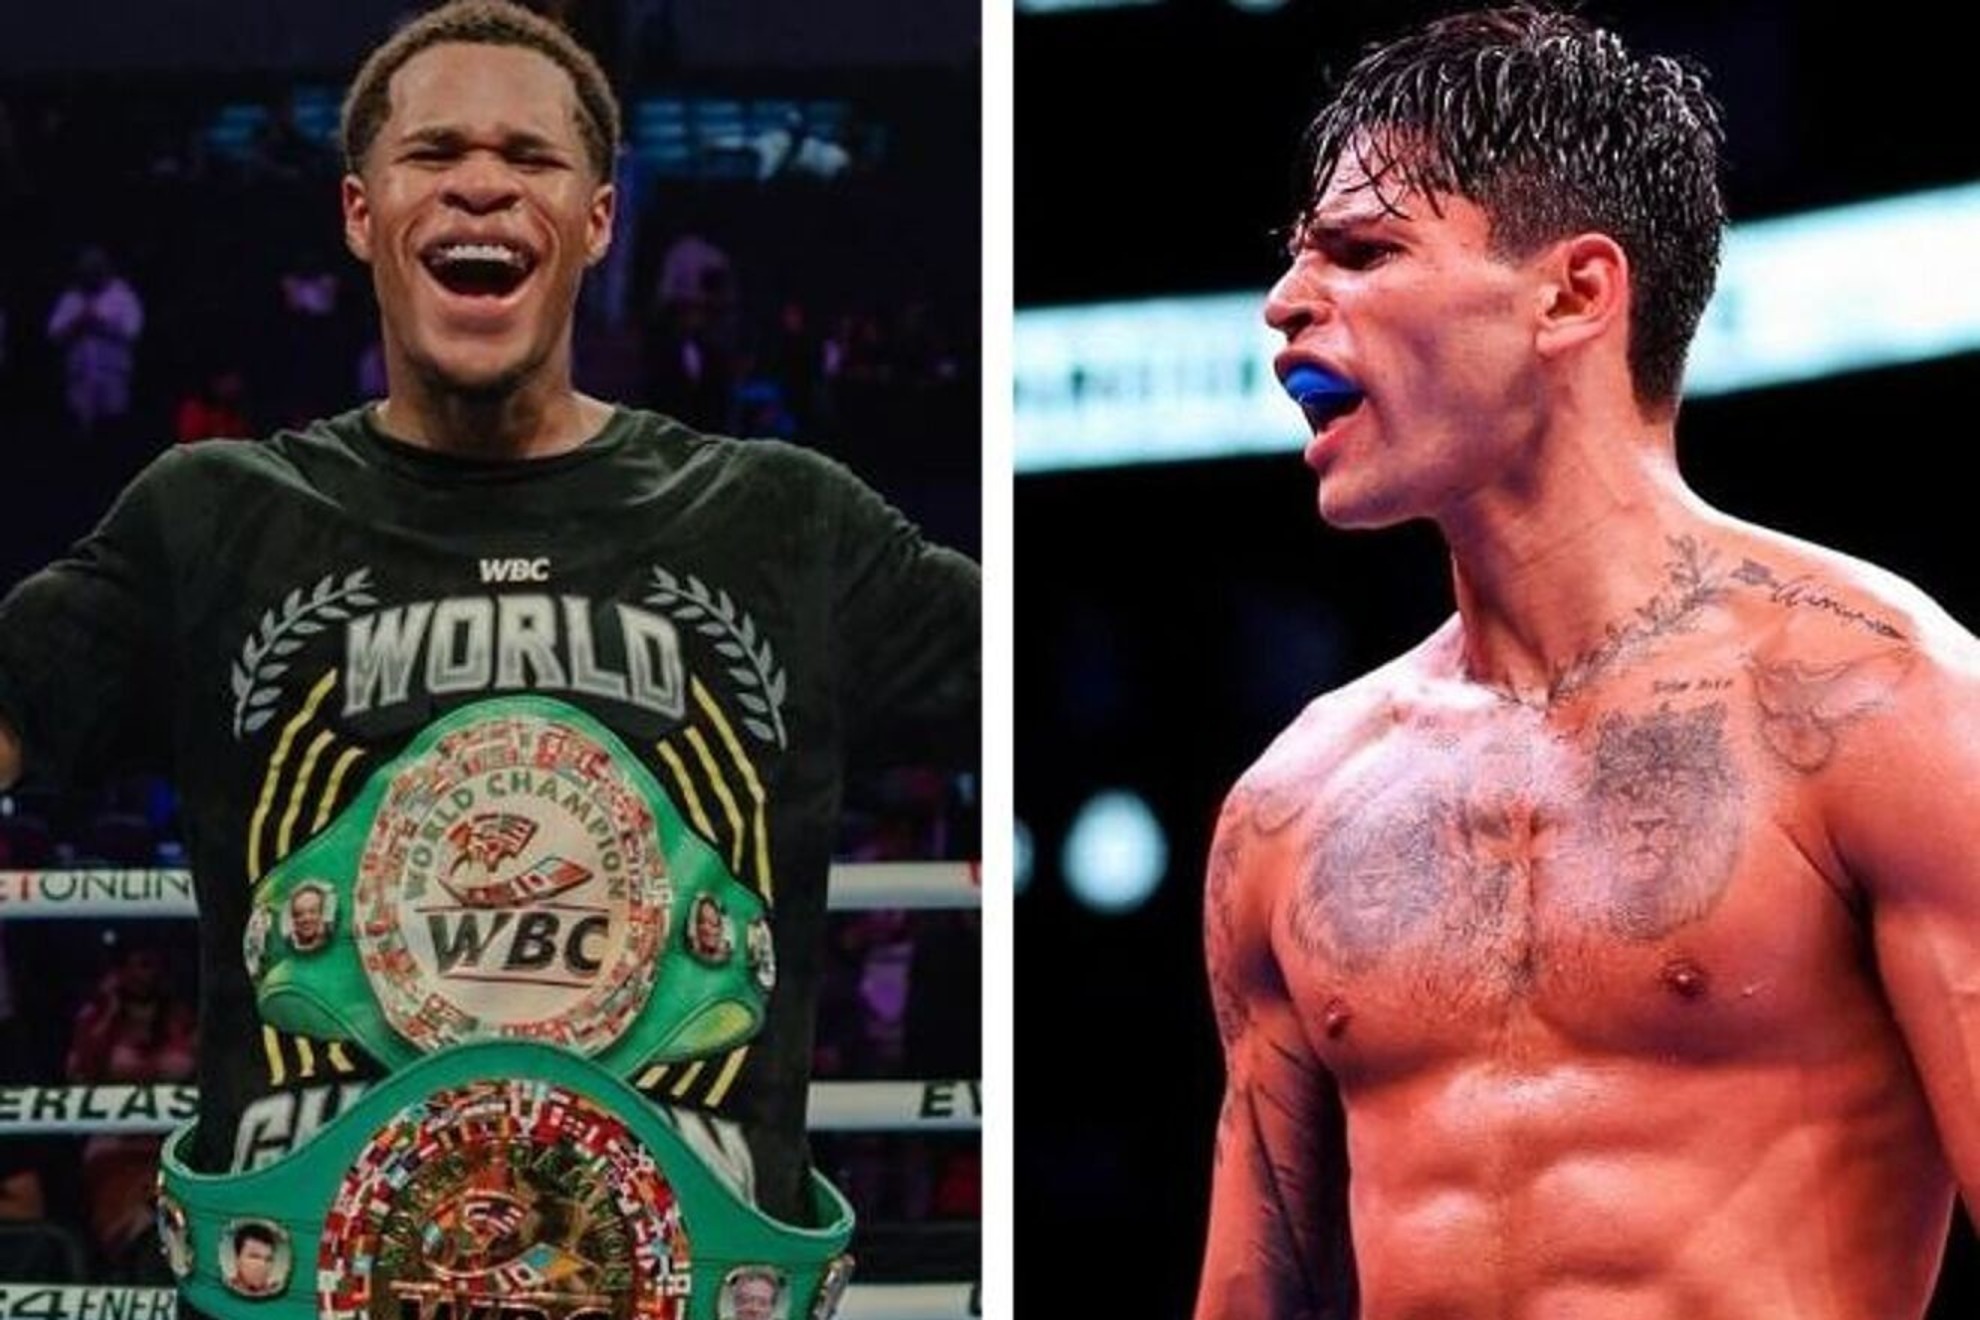 Ryan Garcia vs Devin Haney PPV: Where can you watch the fight and how much is the pay-per-view?